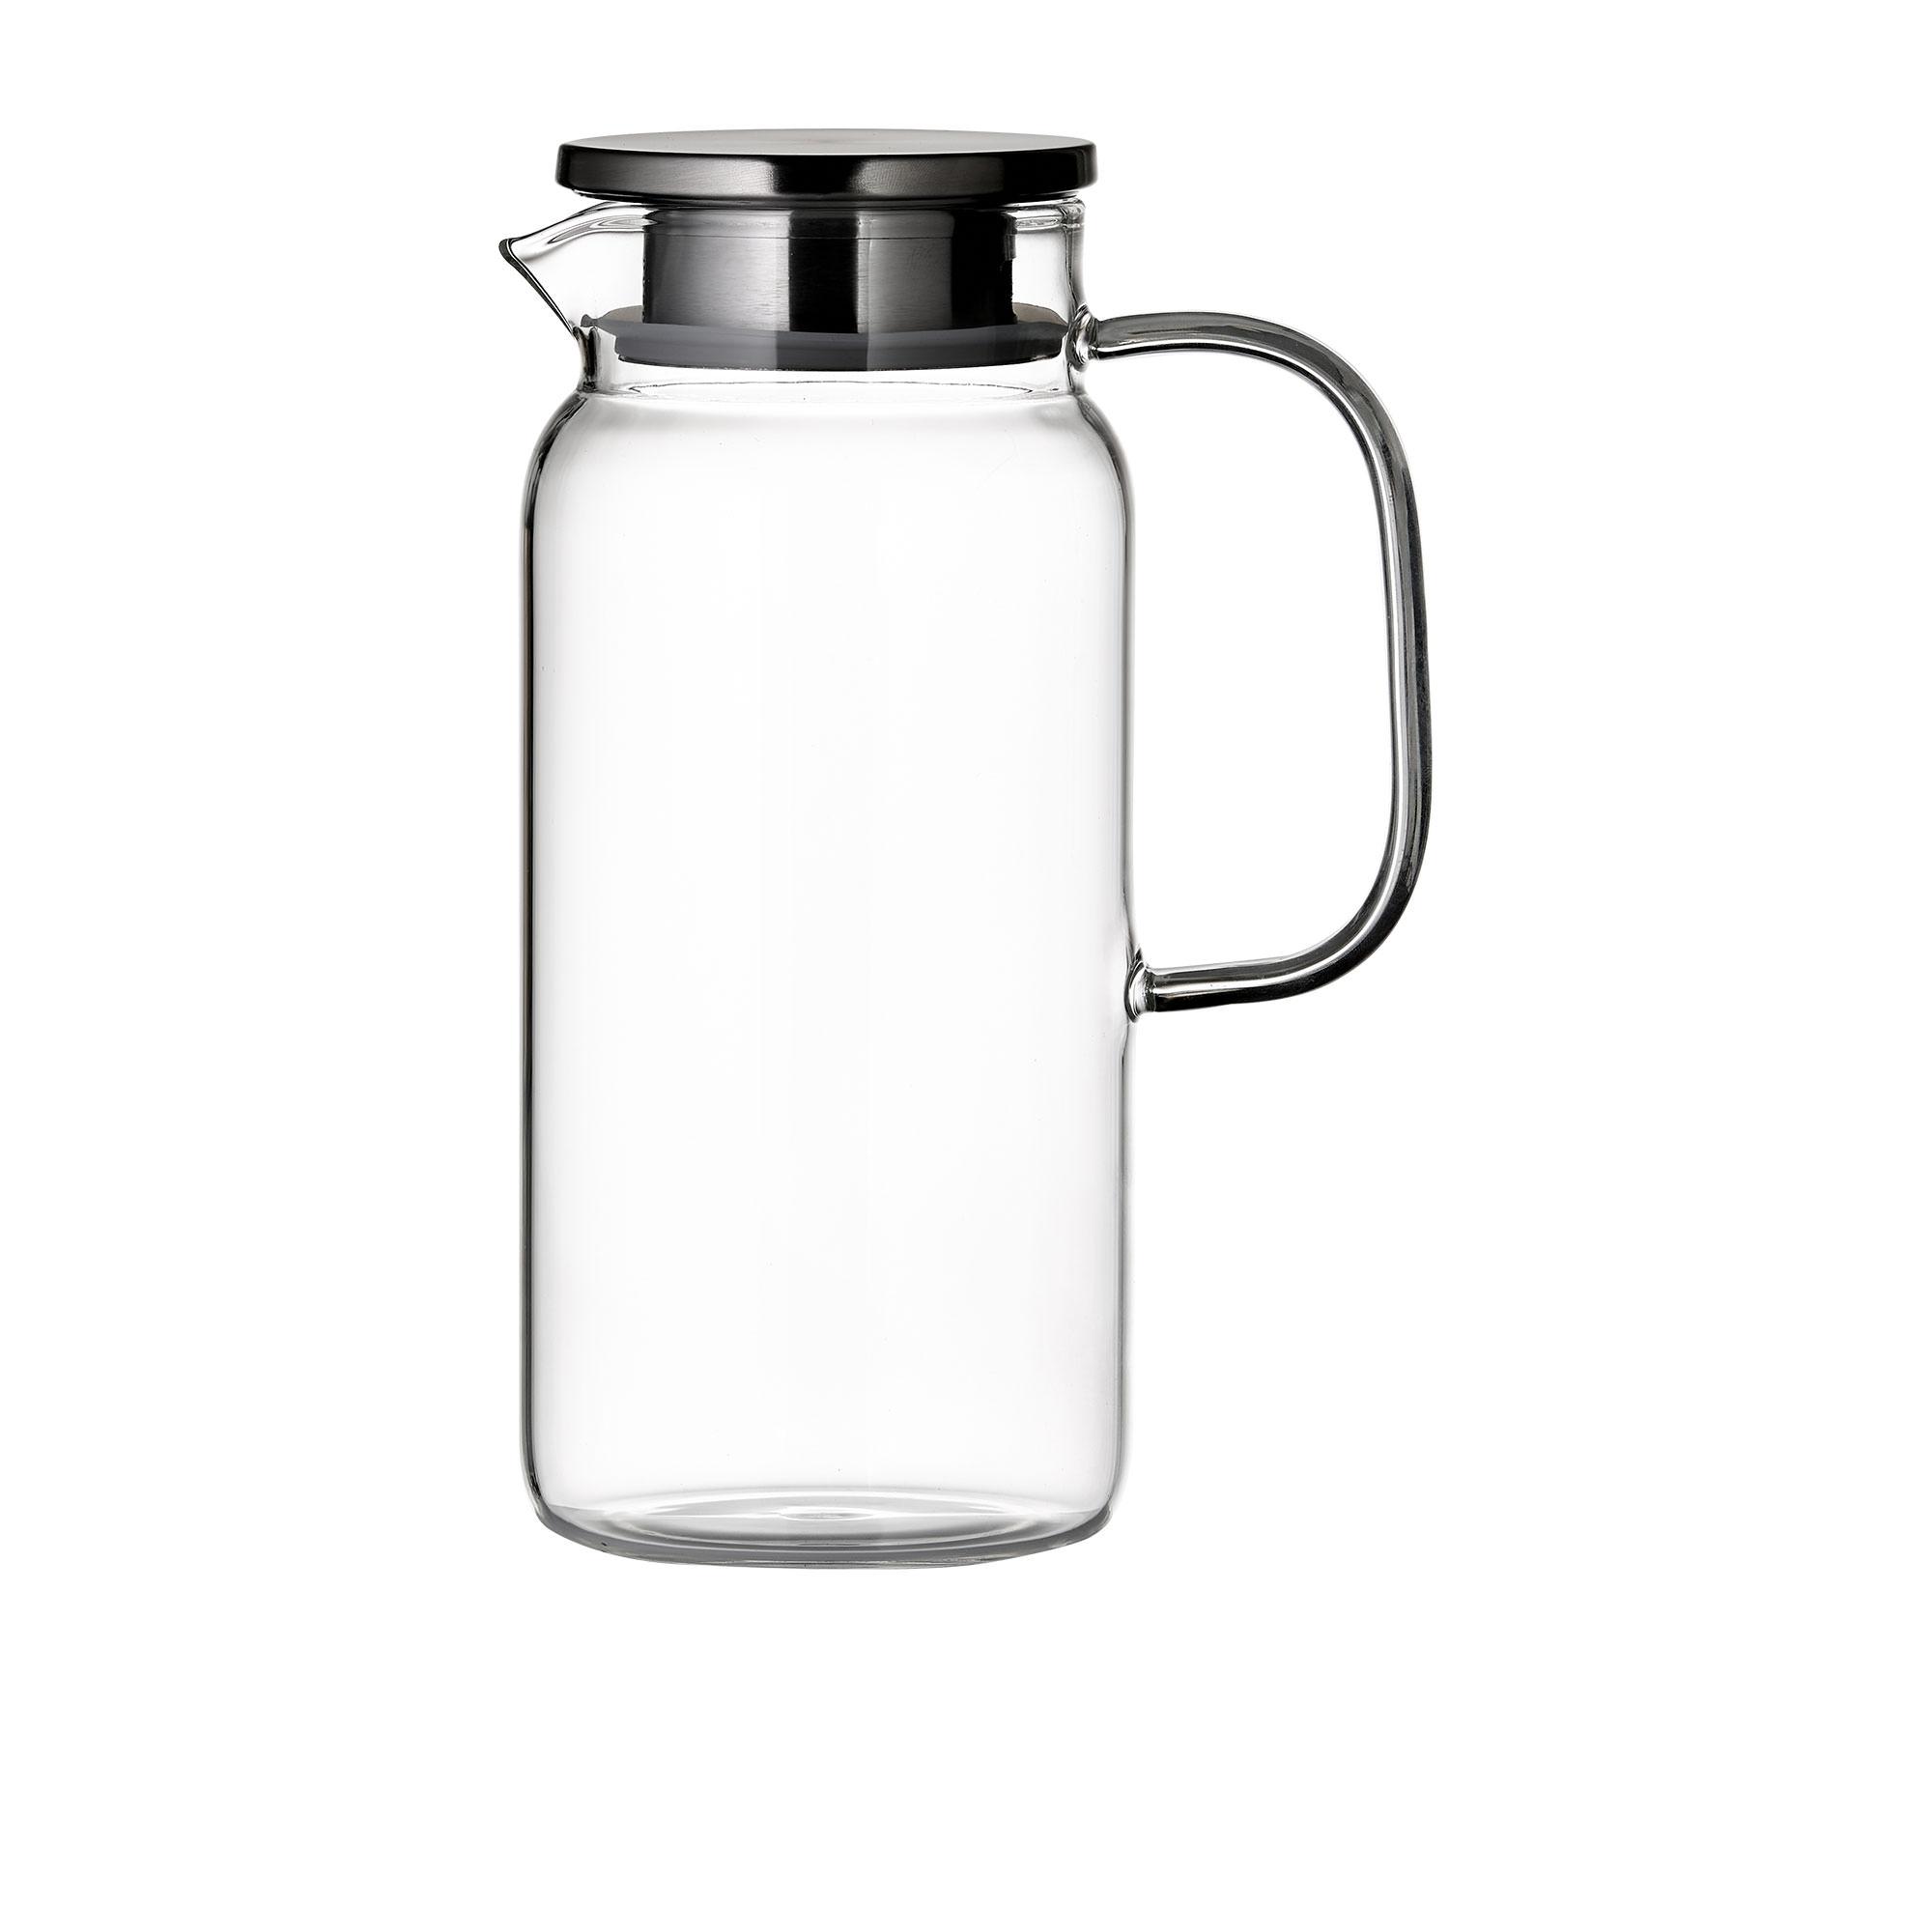 Kitchen Pro Steel Glass Pitcher with Filter 1.6L Image 6